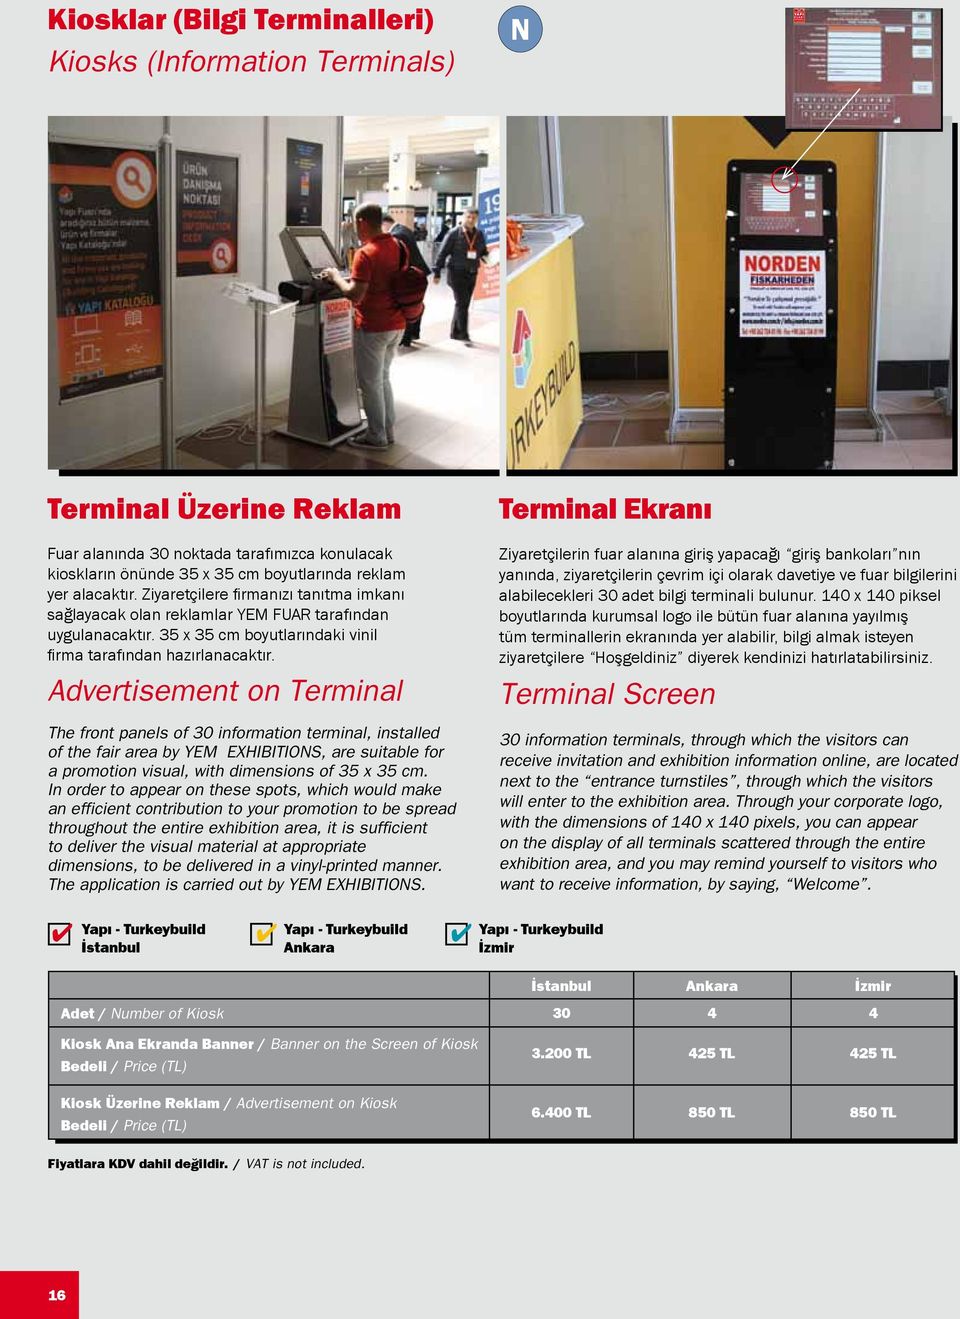 Advertisement on Terminal The front panels of 30 information terminal, installed of the fair area by YEM EXHIBITIONS, are suitable for a promotion visual, with dimensions of 35 x 35 cm.